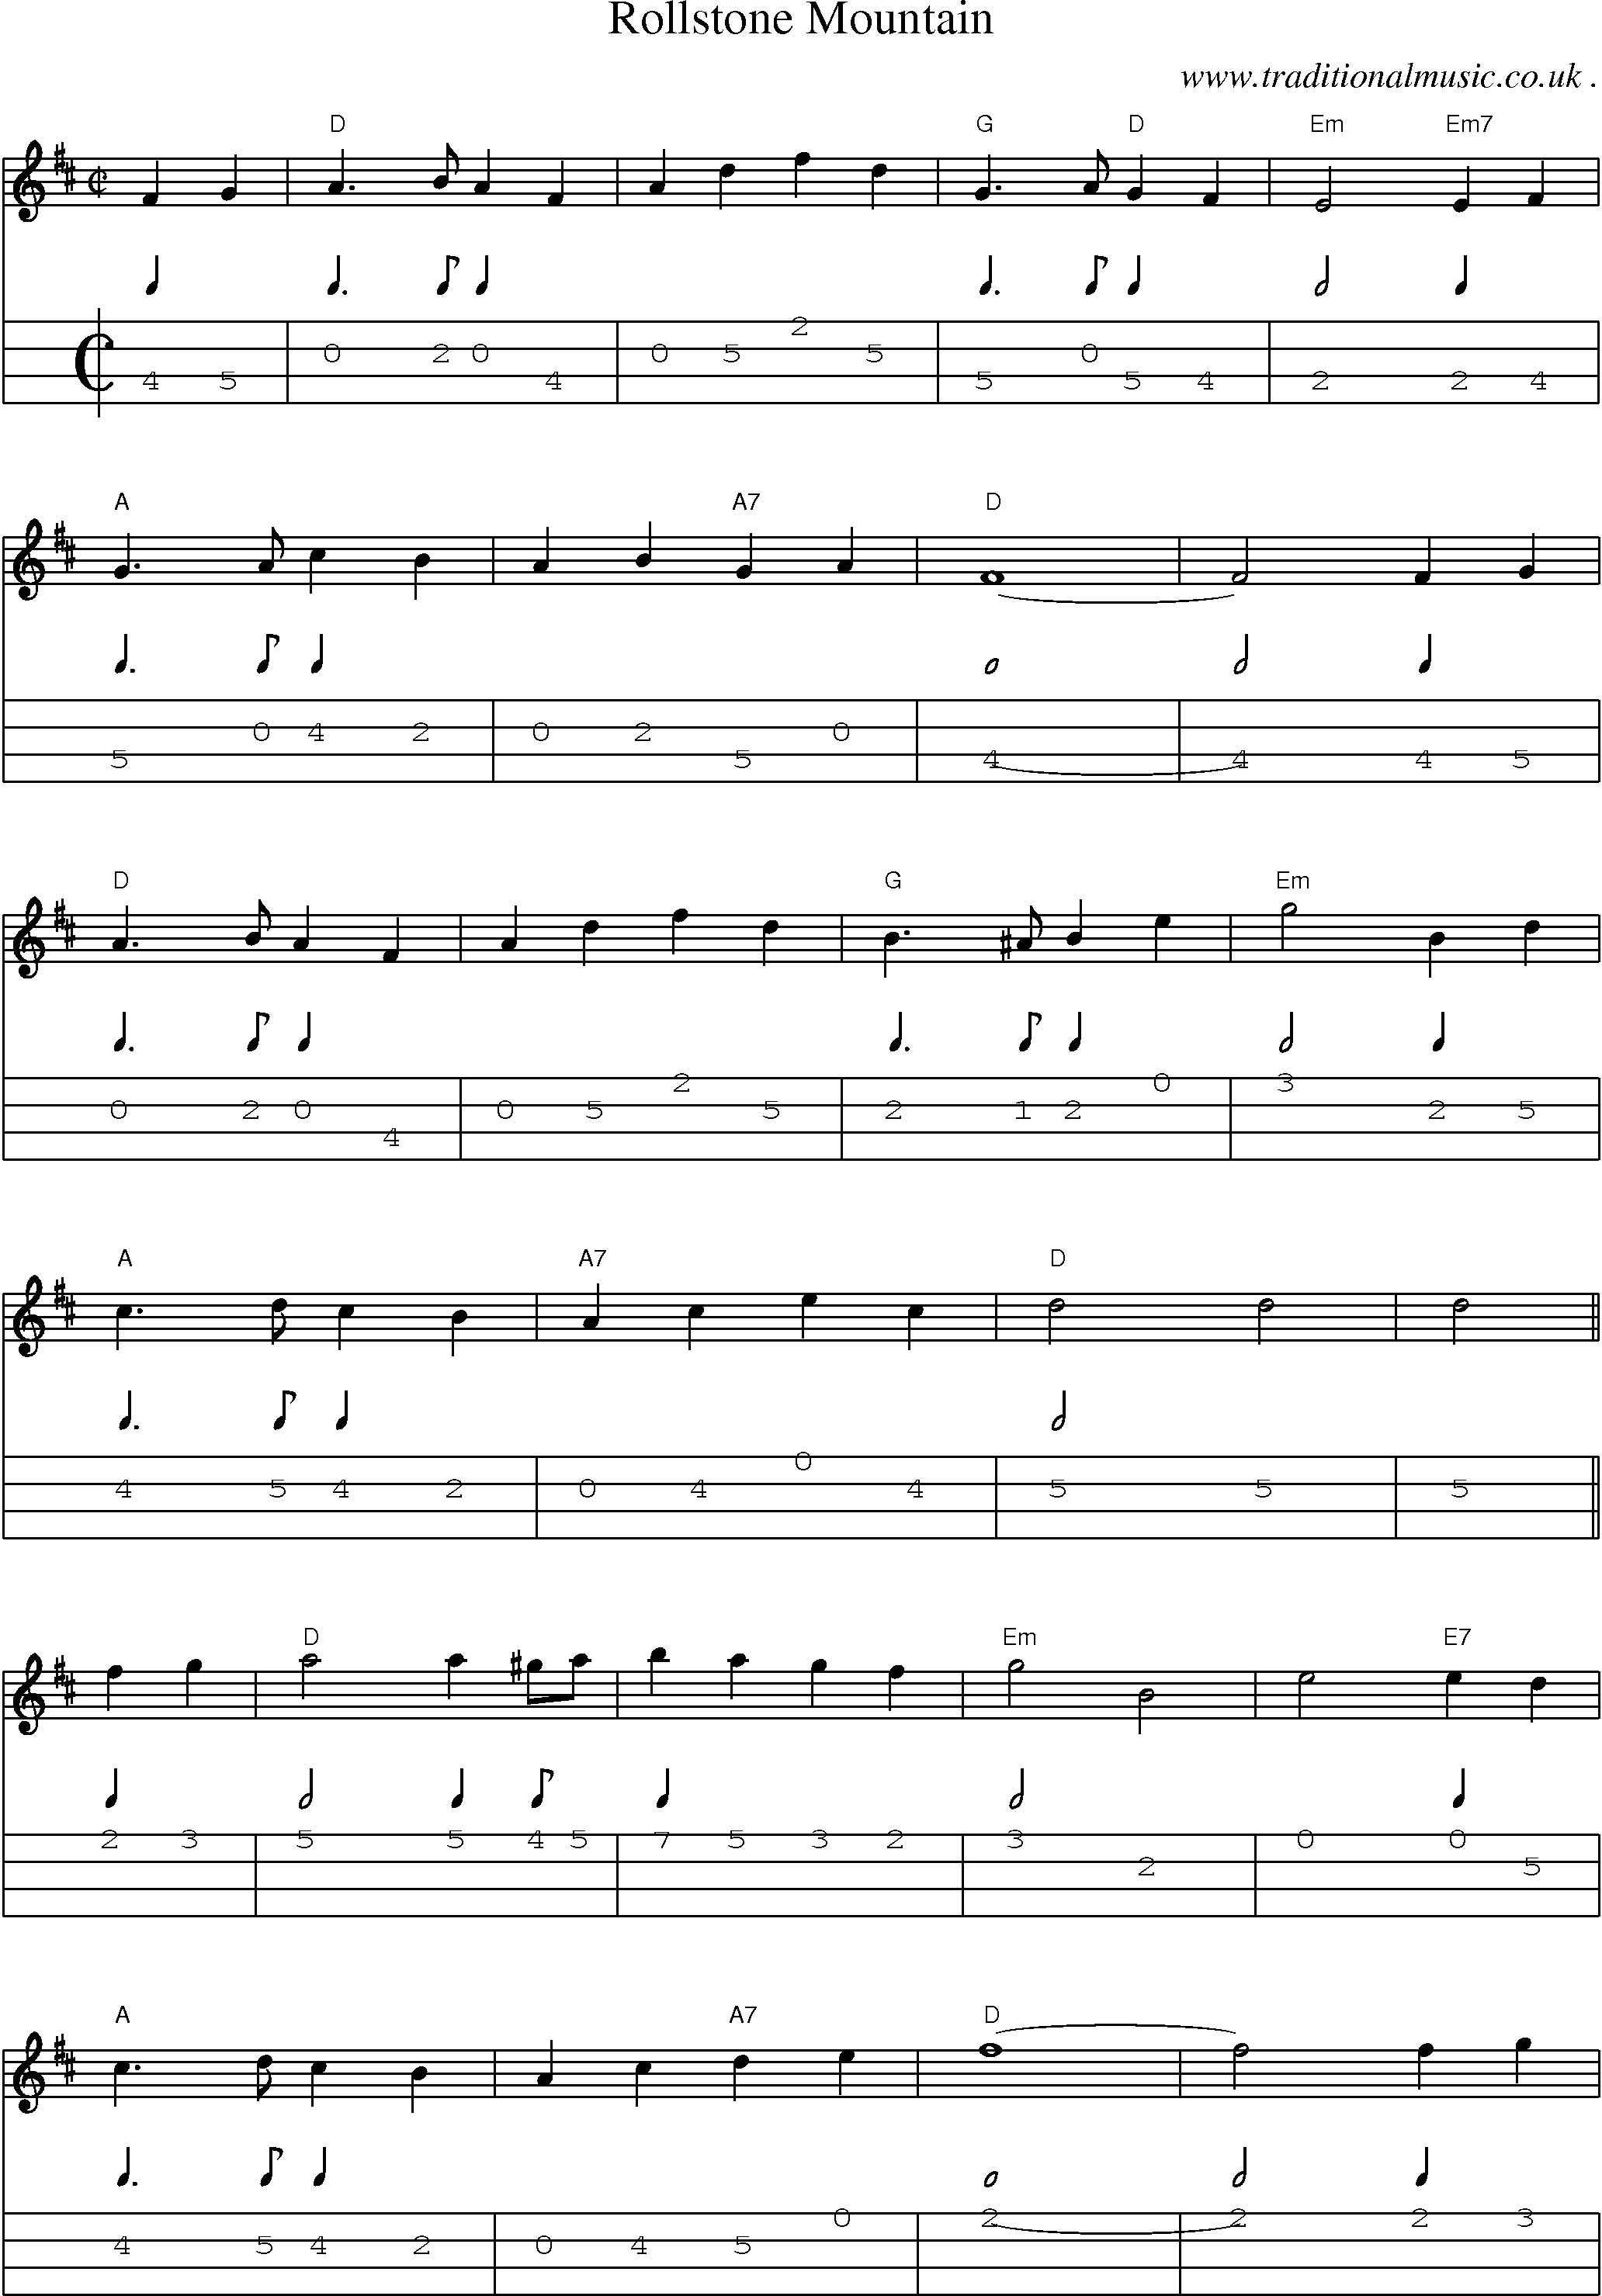 Music Score and Guitar Tabs for Rollstone Mountain